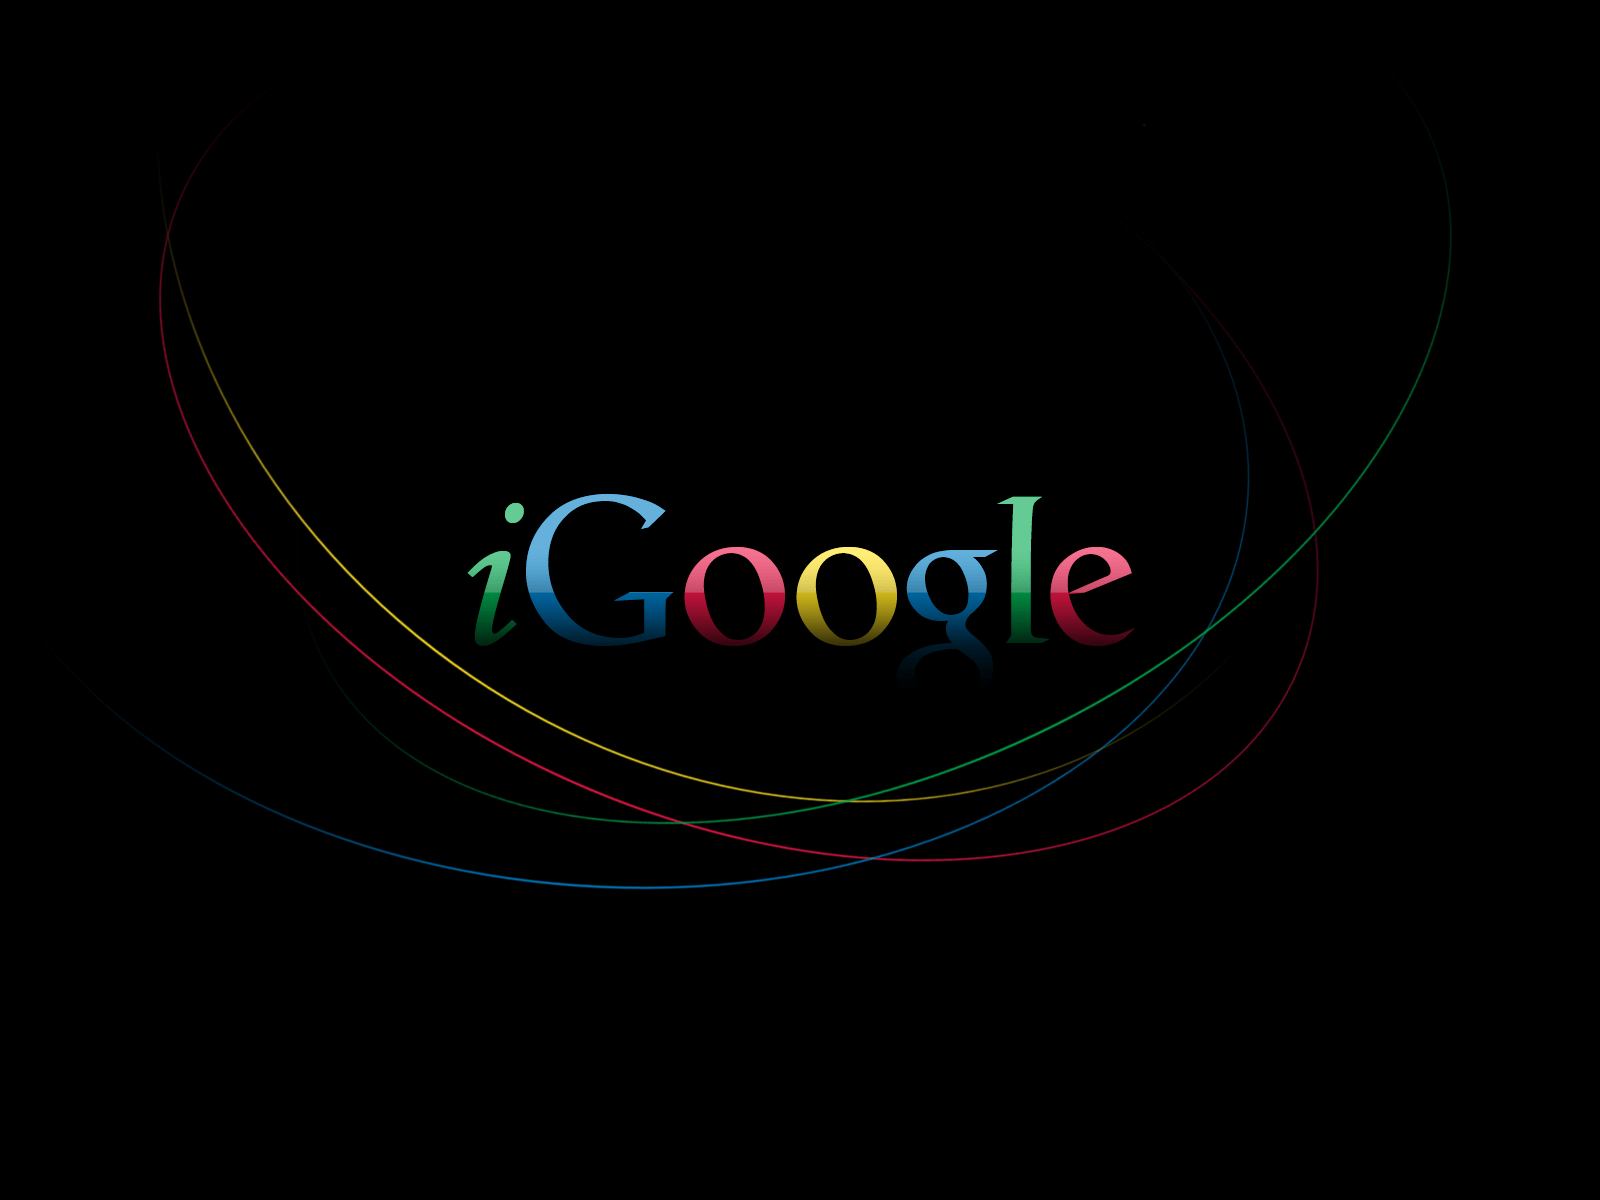 Google Image Wallpapers Search - Wallpaper Cave